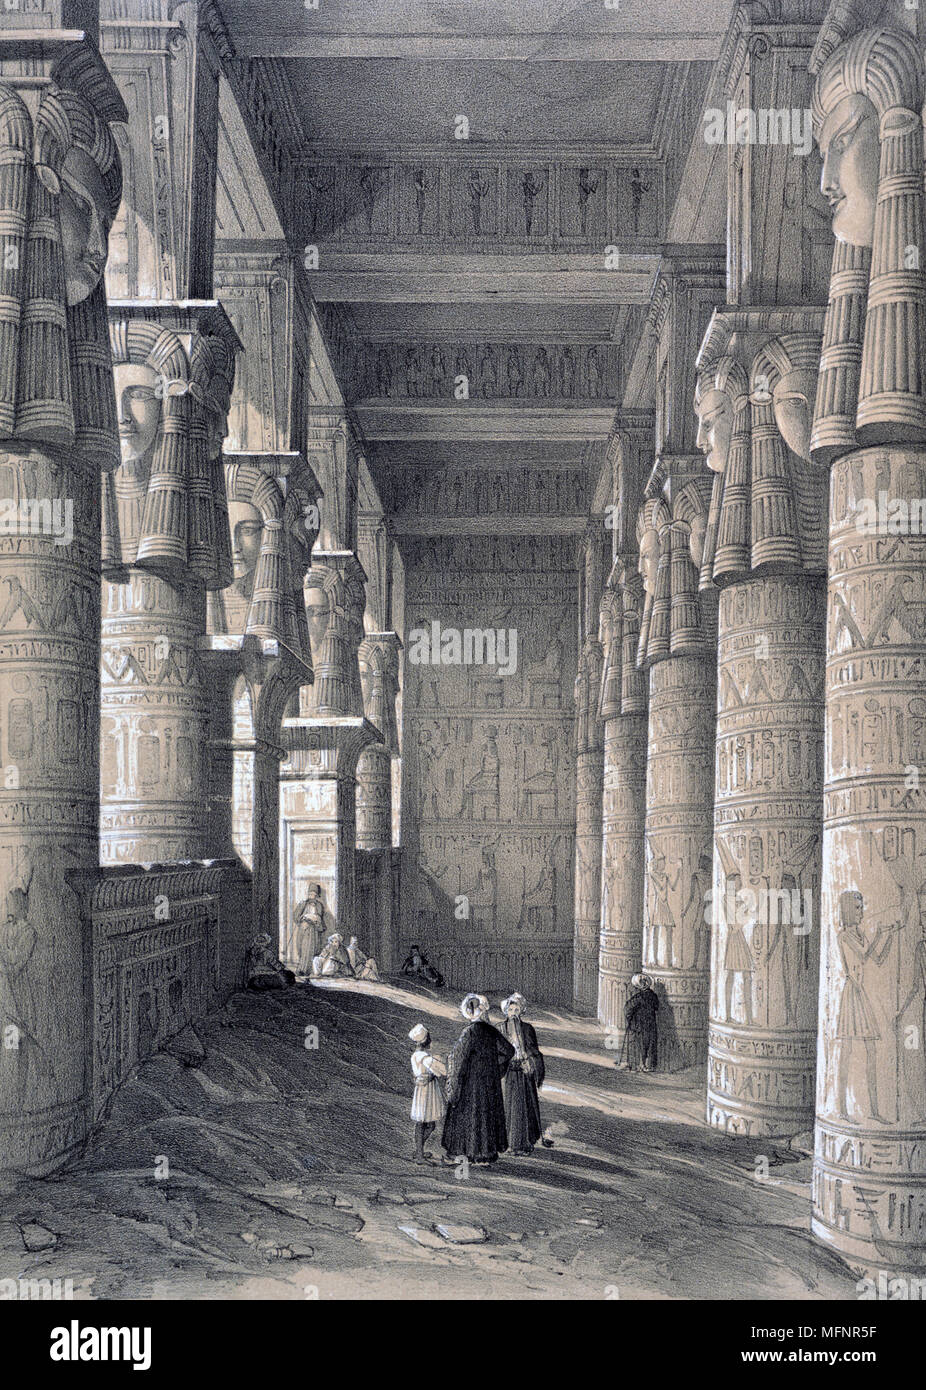 Denderah, interior of the Great Temple', 1843. Lithograph after Owen Jones and Jules Goury. Hippostyle hall of the Temple of Hathor, mother goddess of Ancient Egypt. Archaeology Architecture Religion Mythology Stock Photo